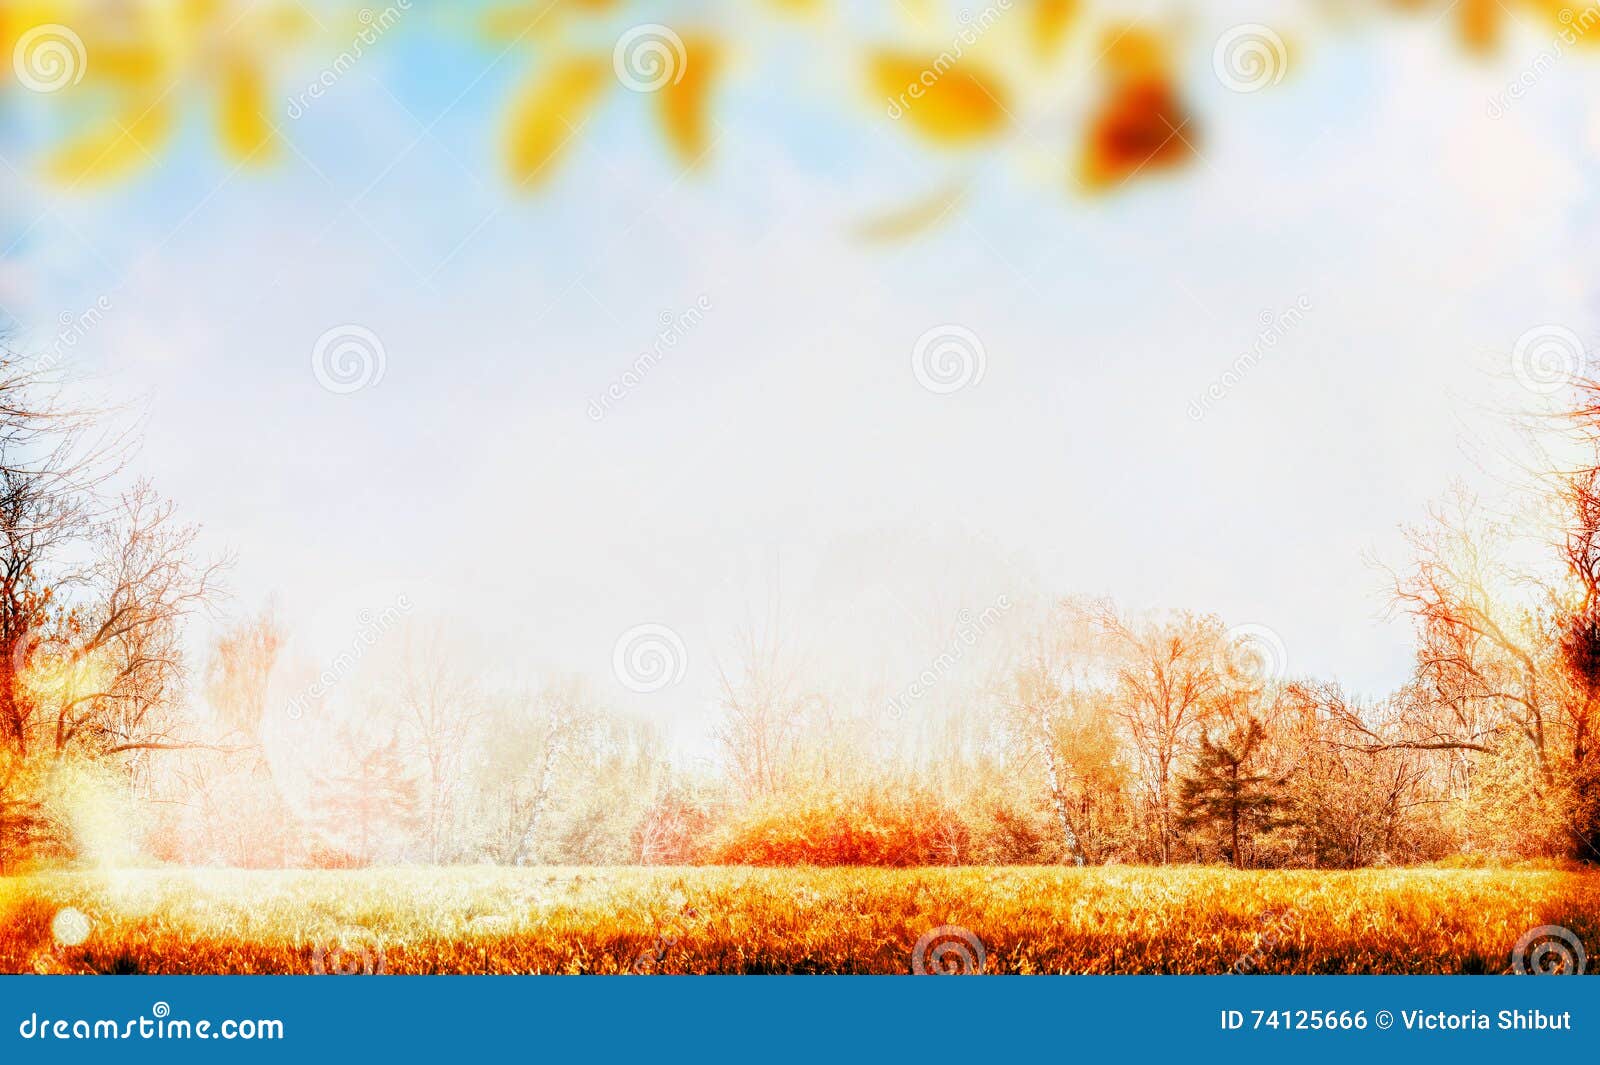 Autumn Nature Garden Or Park Background With Lawn Sky And 